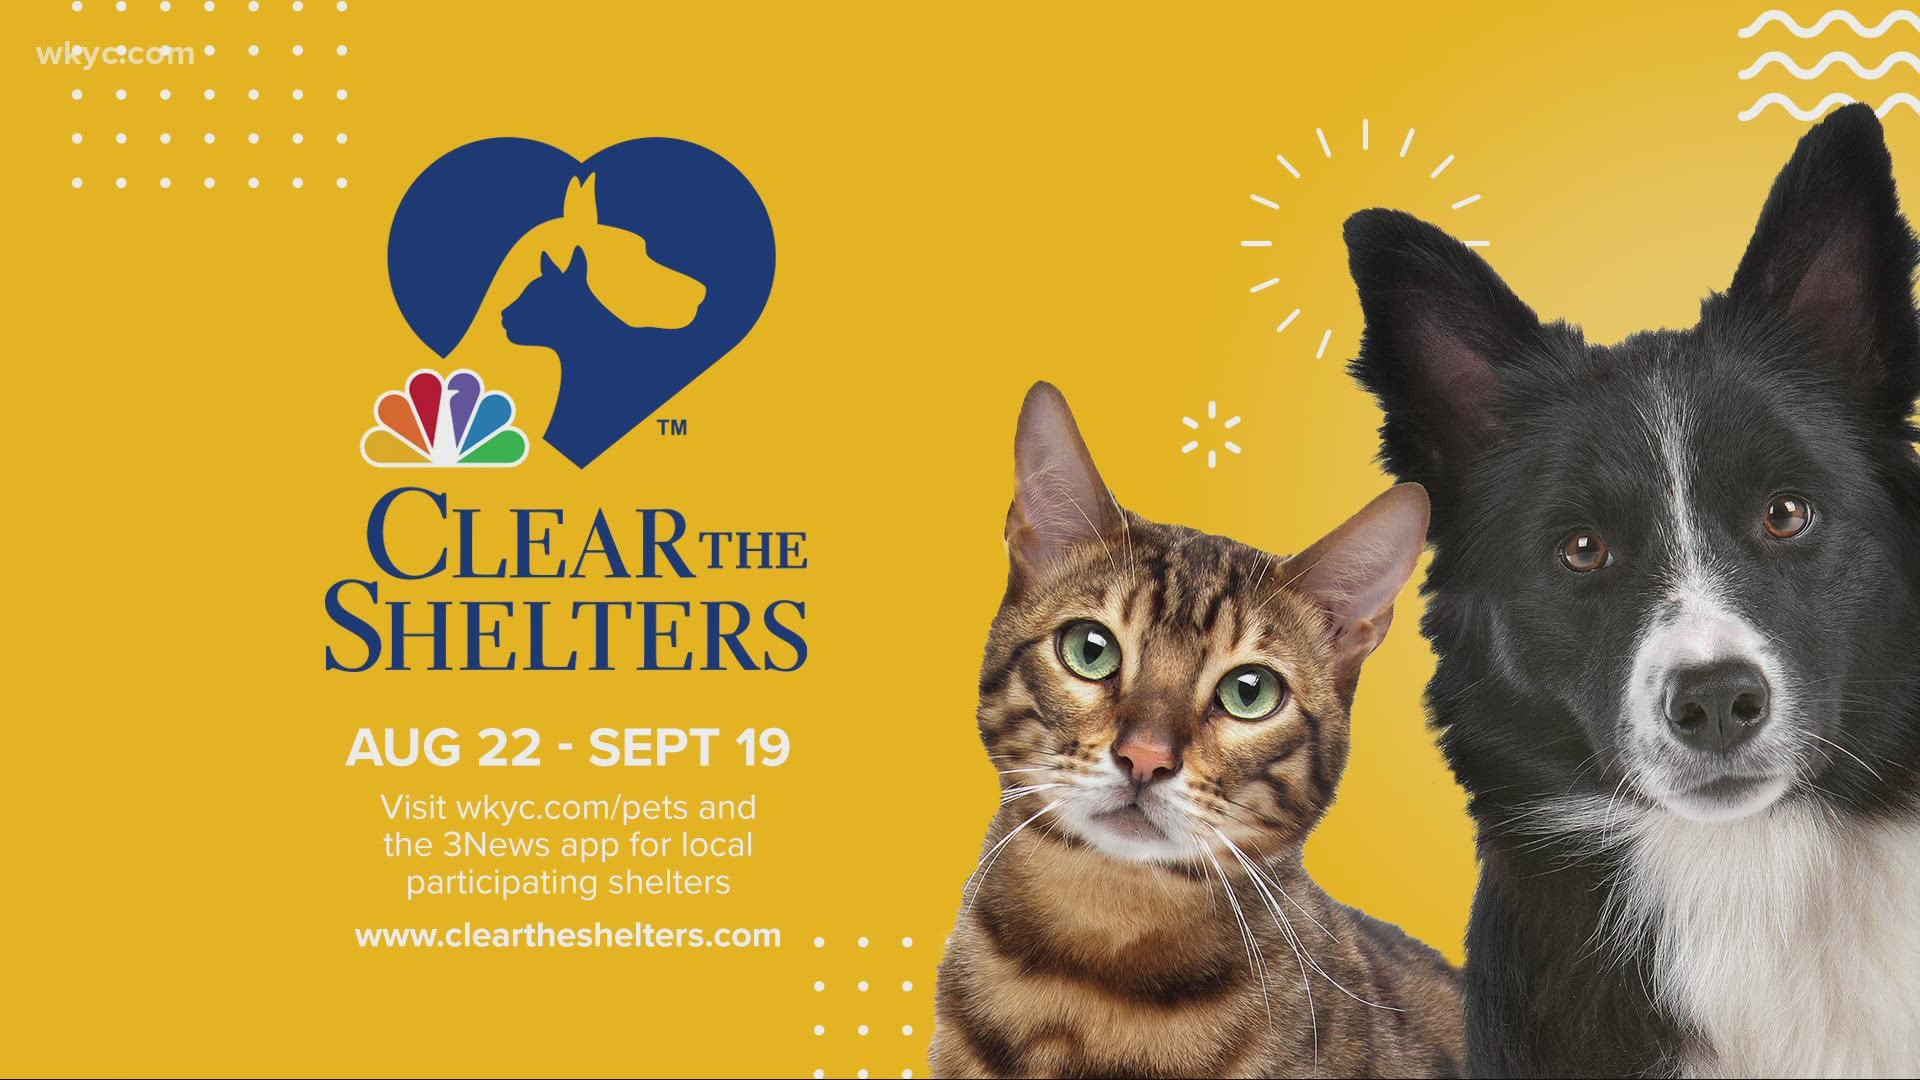 Clear the Shelters runs from Sunday, Aug. 22 through Sunday, Sept. 19